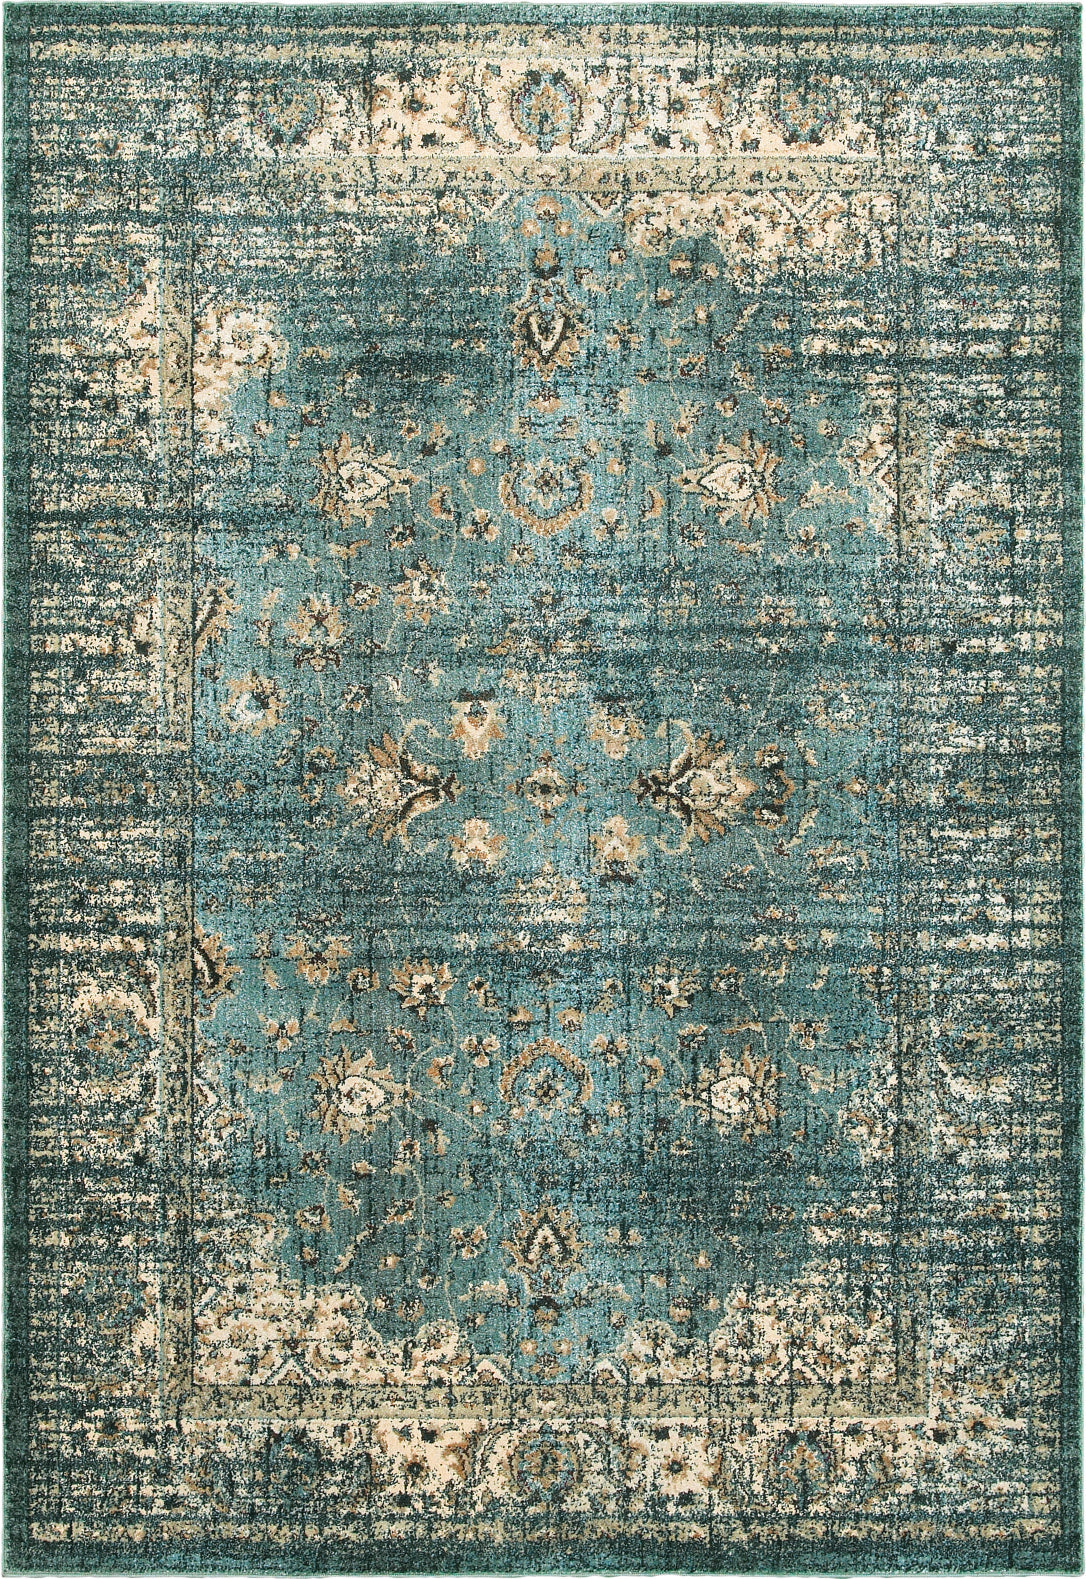 Oriental Weavers Empire 114L4 Blue/ Ivory Area Rug main image featured